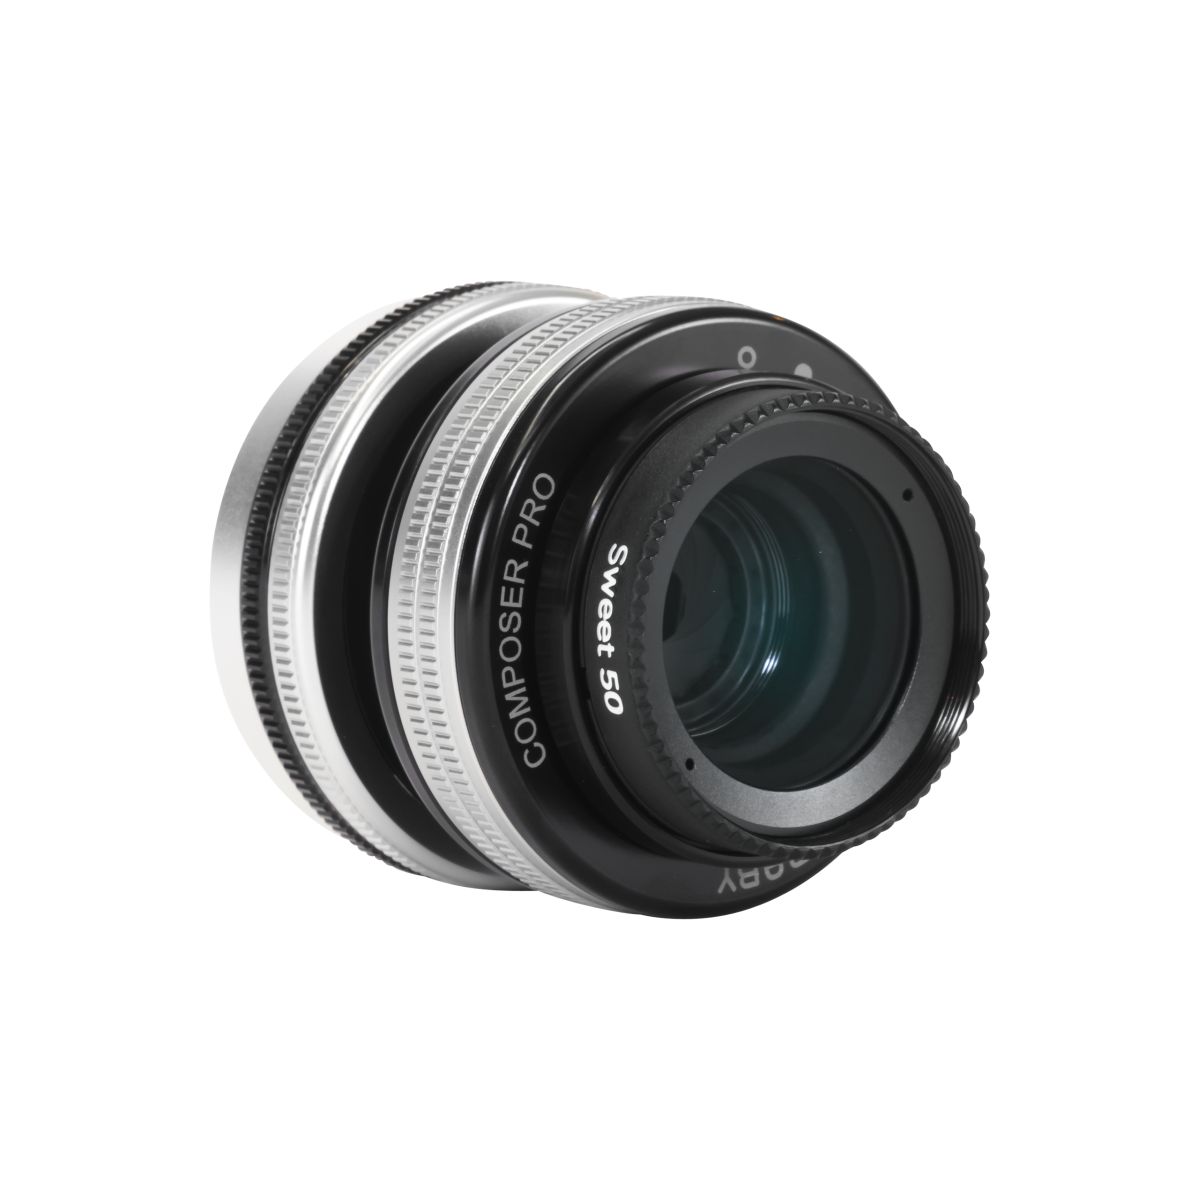 Lensbaby Composer Pro II + Sweet 50 Micro Four Thirds